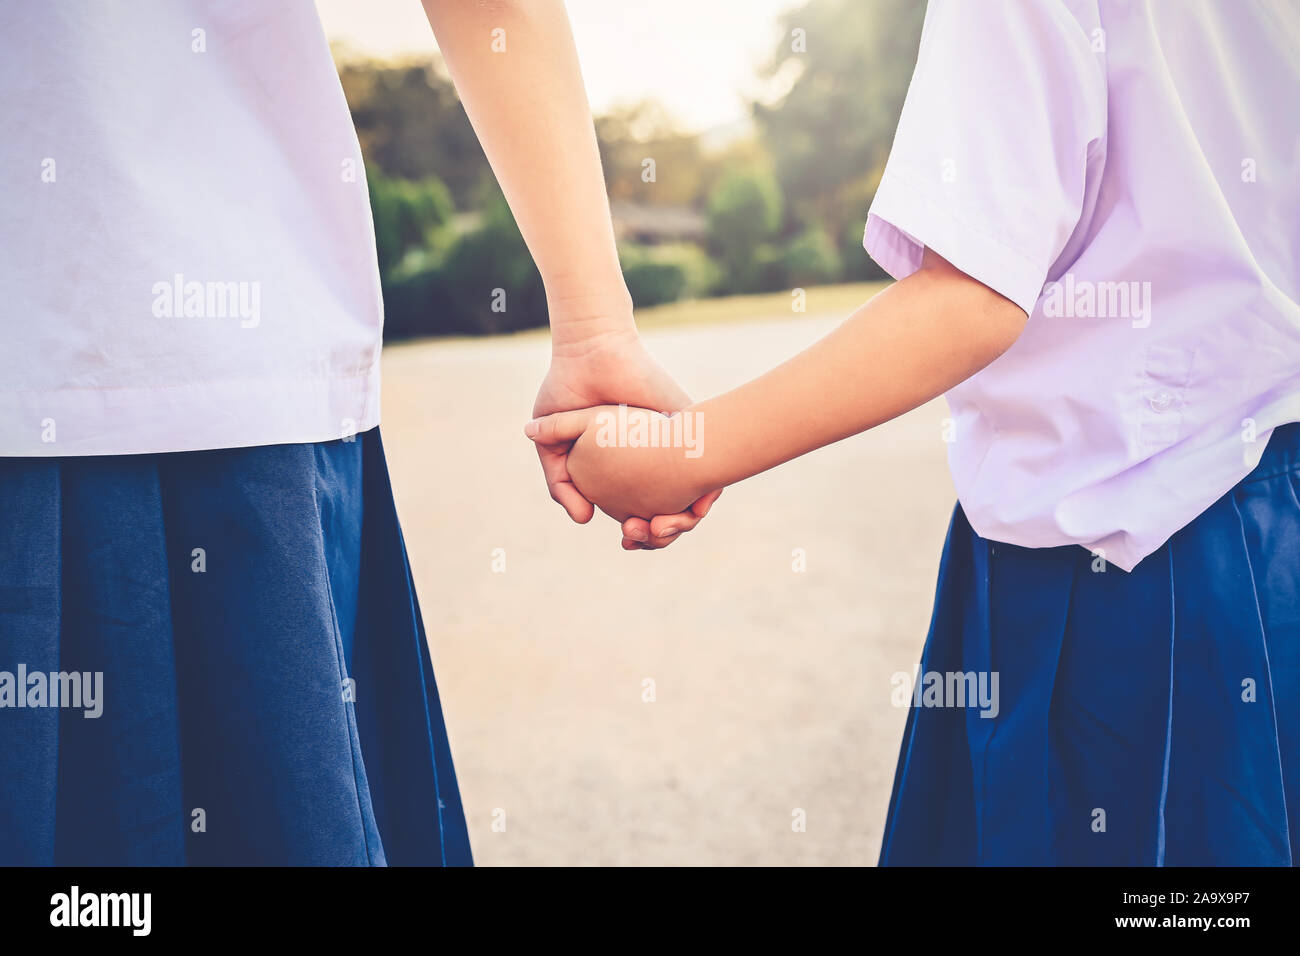 Sisters clasped holding hands waiting across the road . With hands clasped, they bind together in love friendship Stock Photo